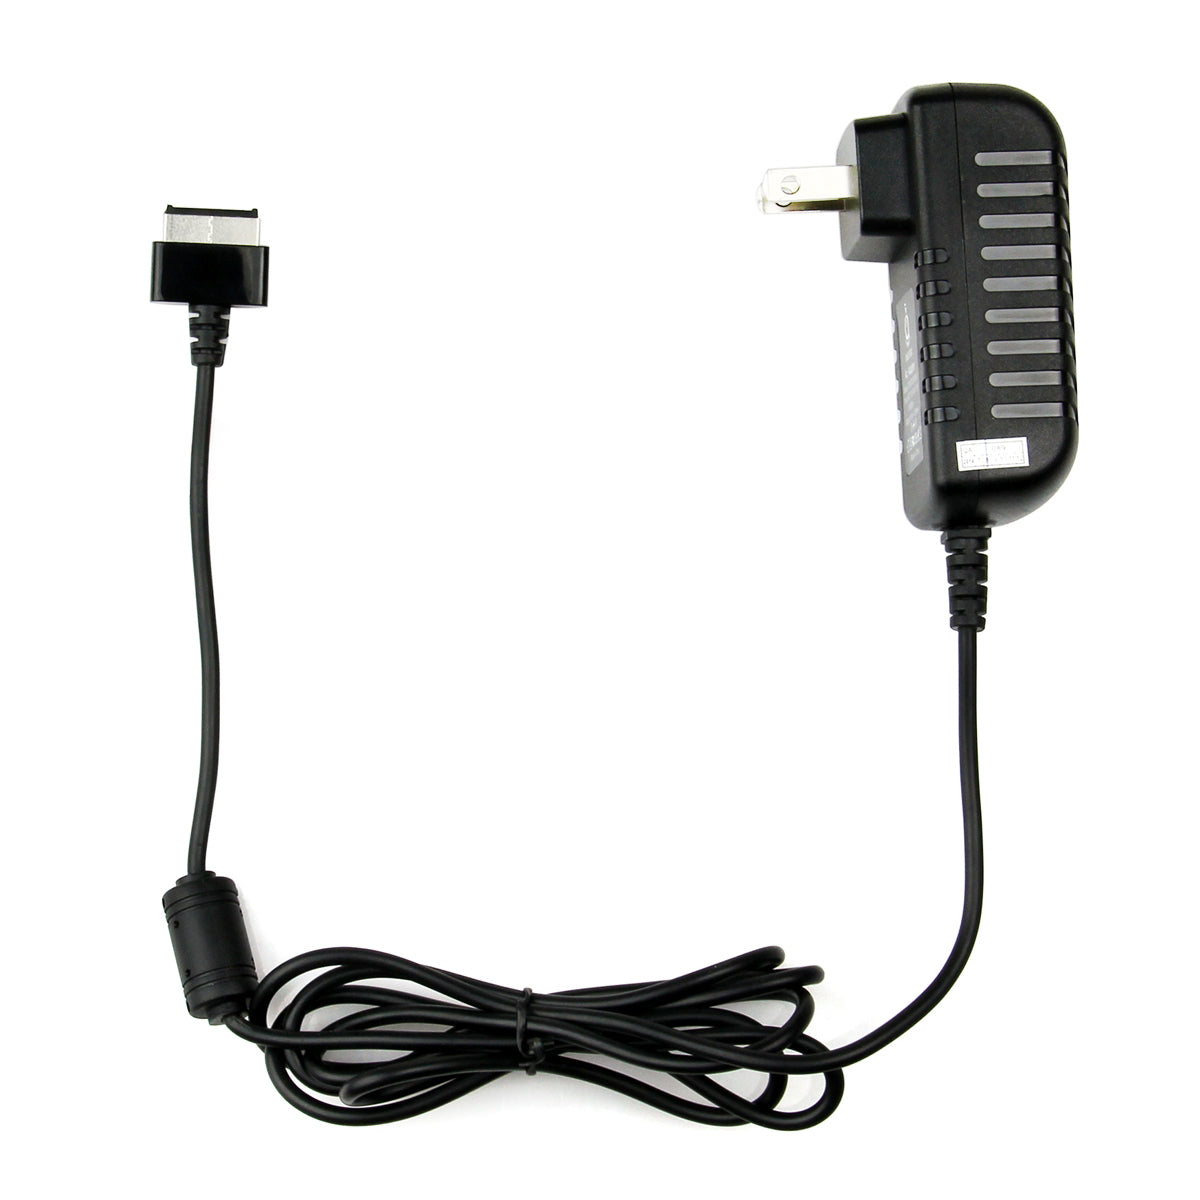 AC Adapter Charger for ASUS TF101 B2 Tablet.